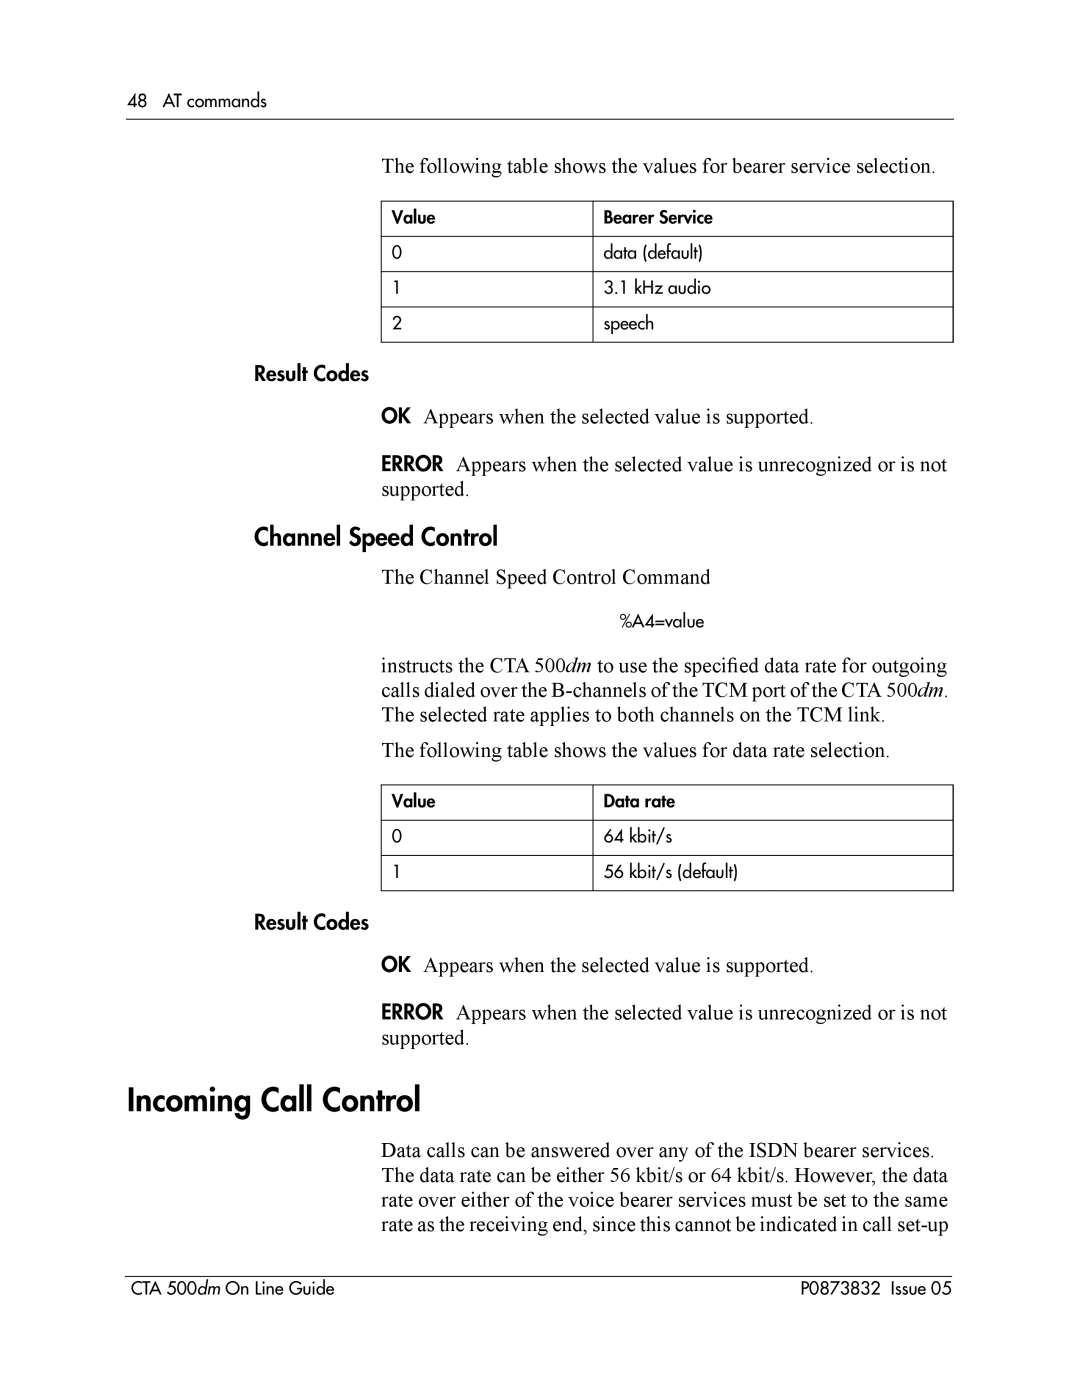 Nortel Networks CTA 500dm manual Incoming Call Control, Channel Speed Control 